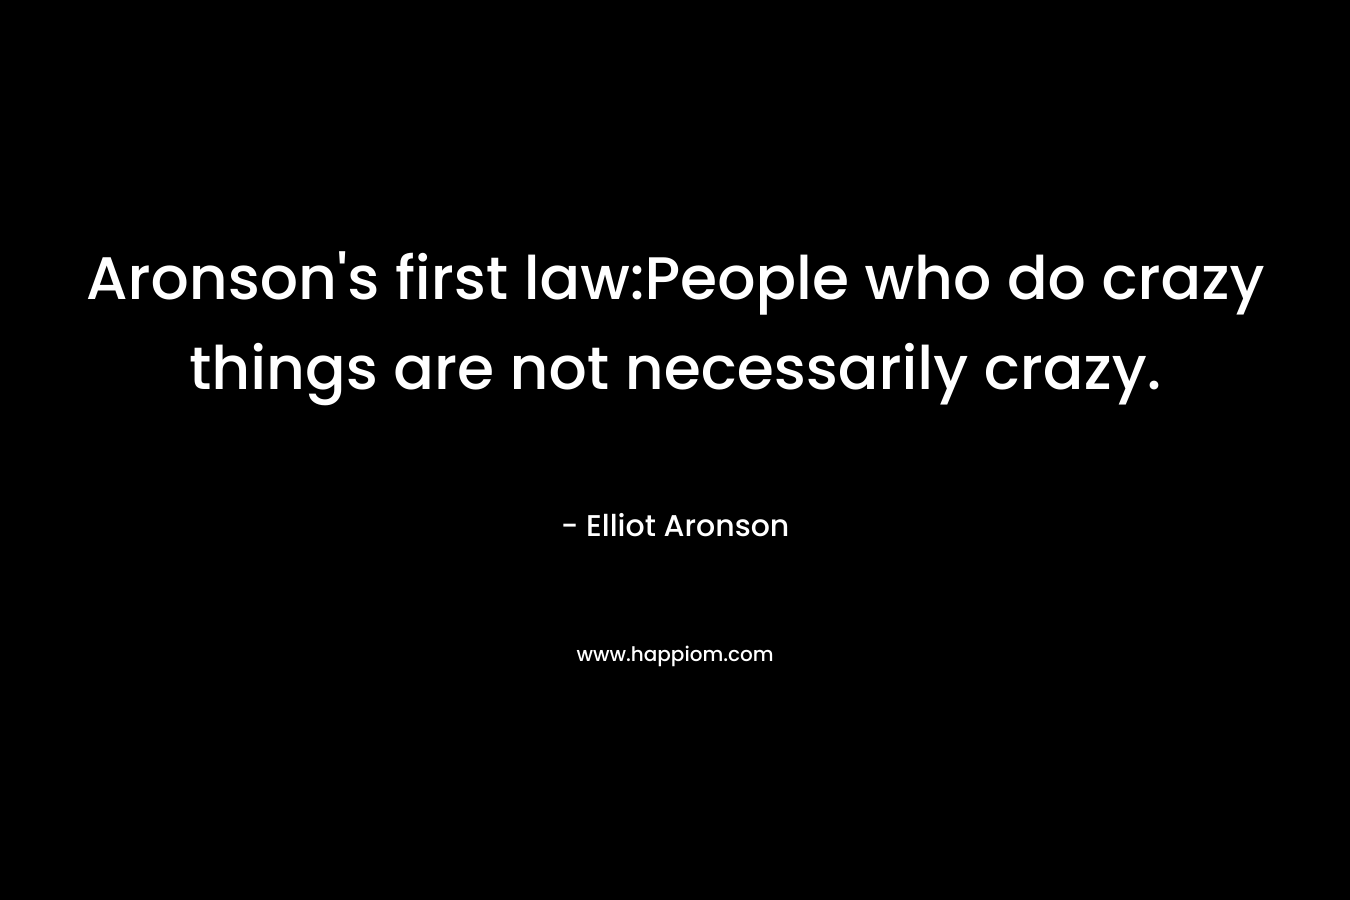 Aronson's first law:People who do crazy things are not necessarily crazy.